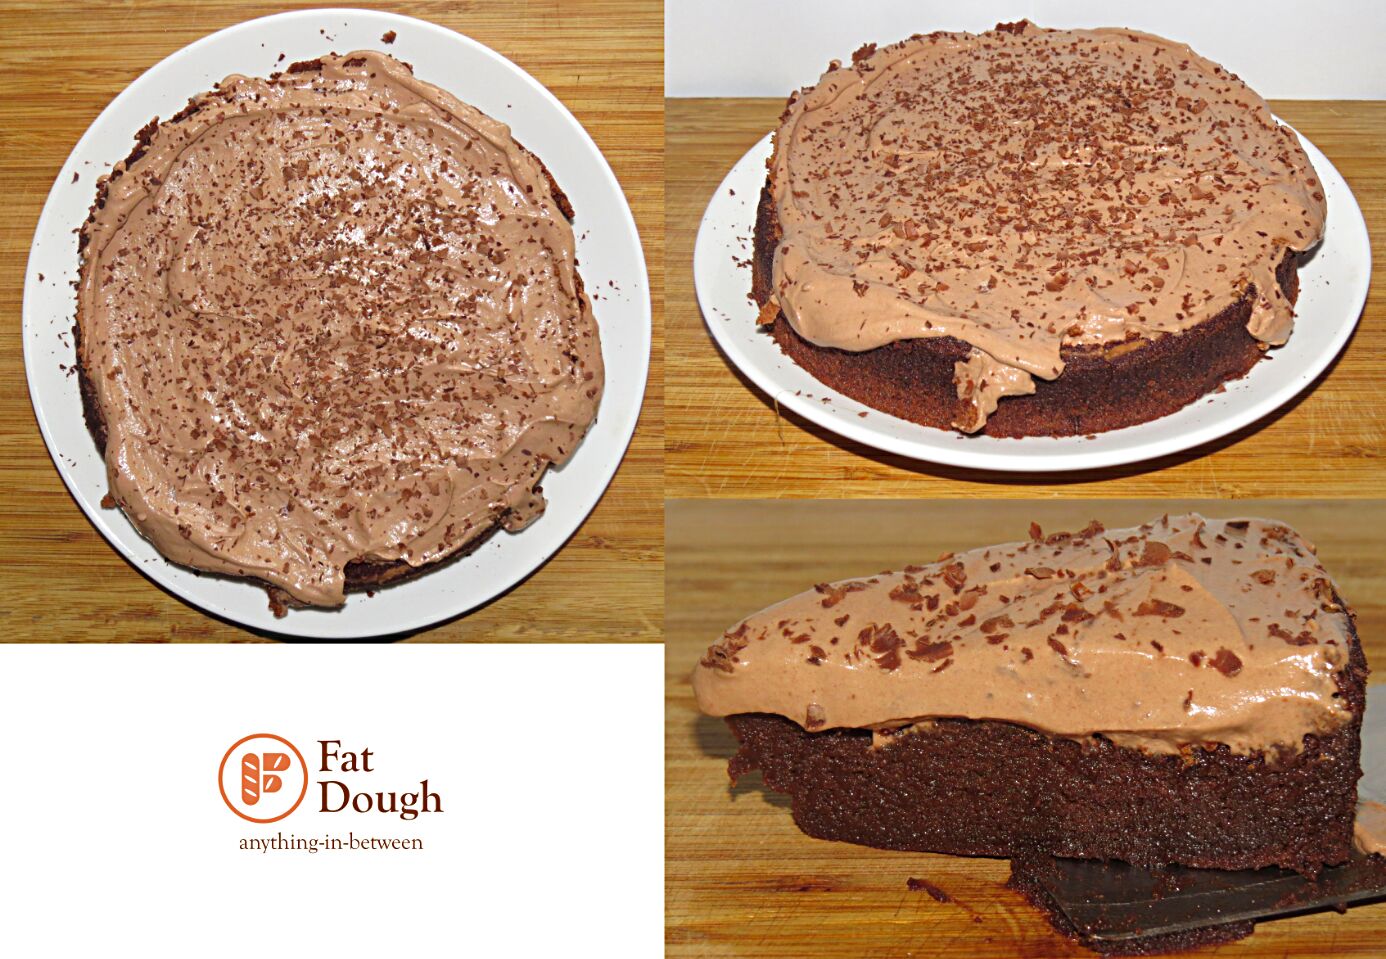 Awesome Fallen Chocolate Cake With Chocolate Whipped Cream